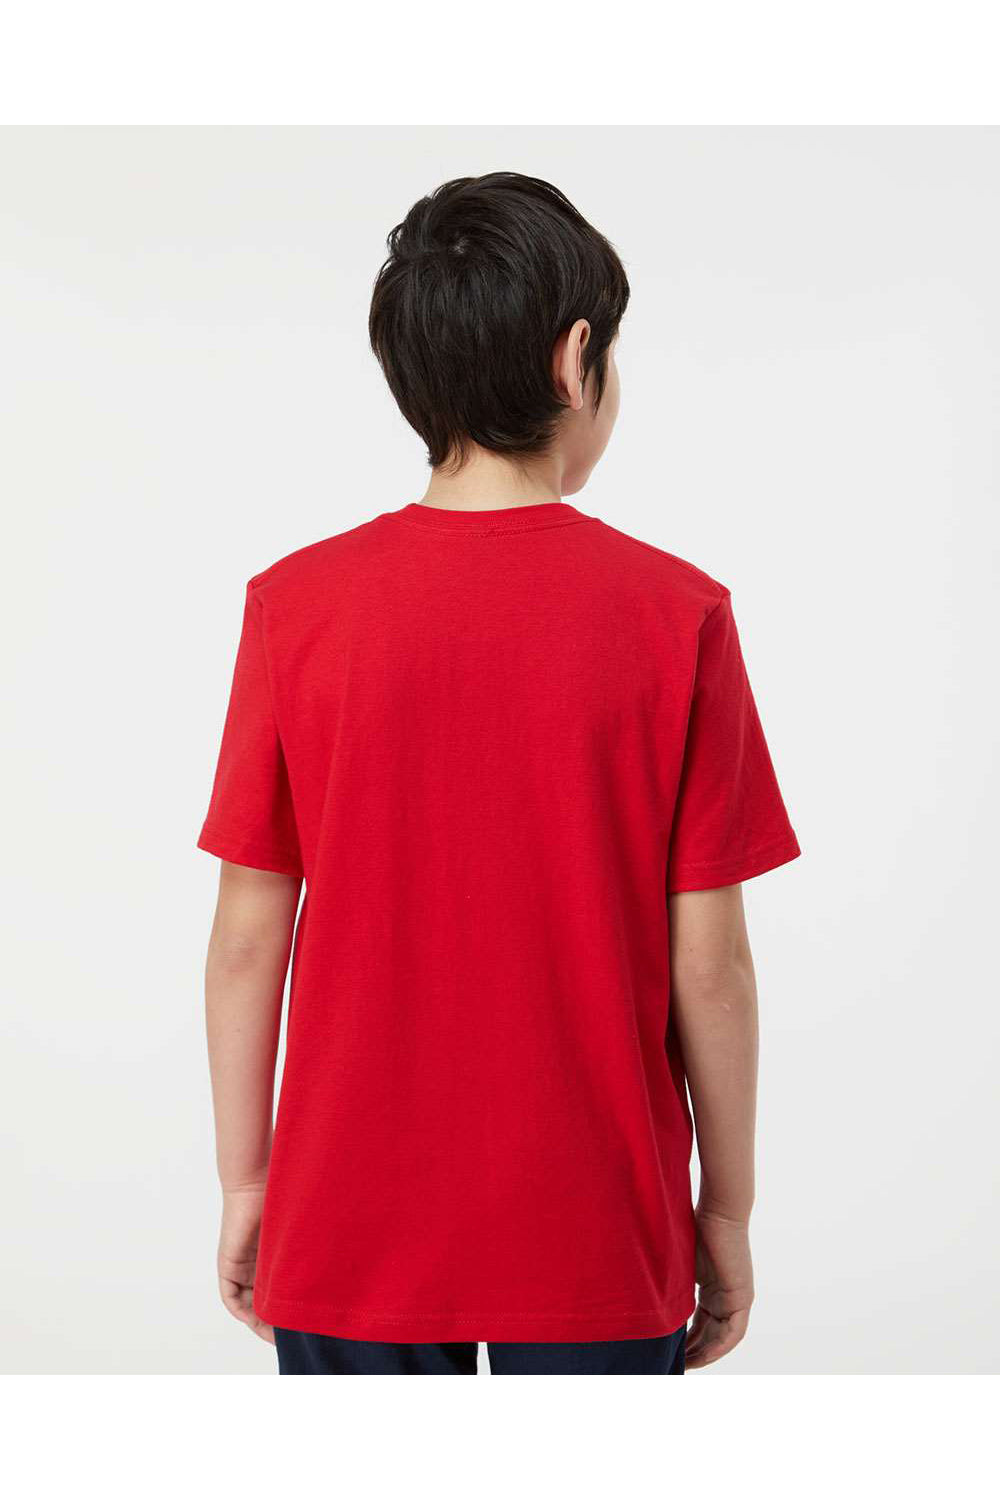 Tultex 295 Youth Jersey Short Sleeve Crewneck T-Shirt Red Model Back